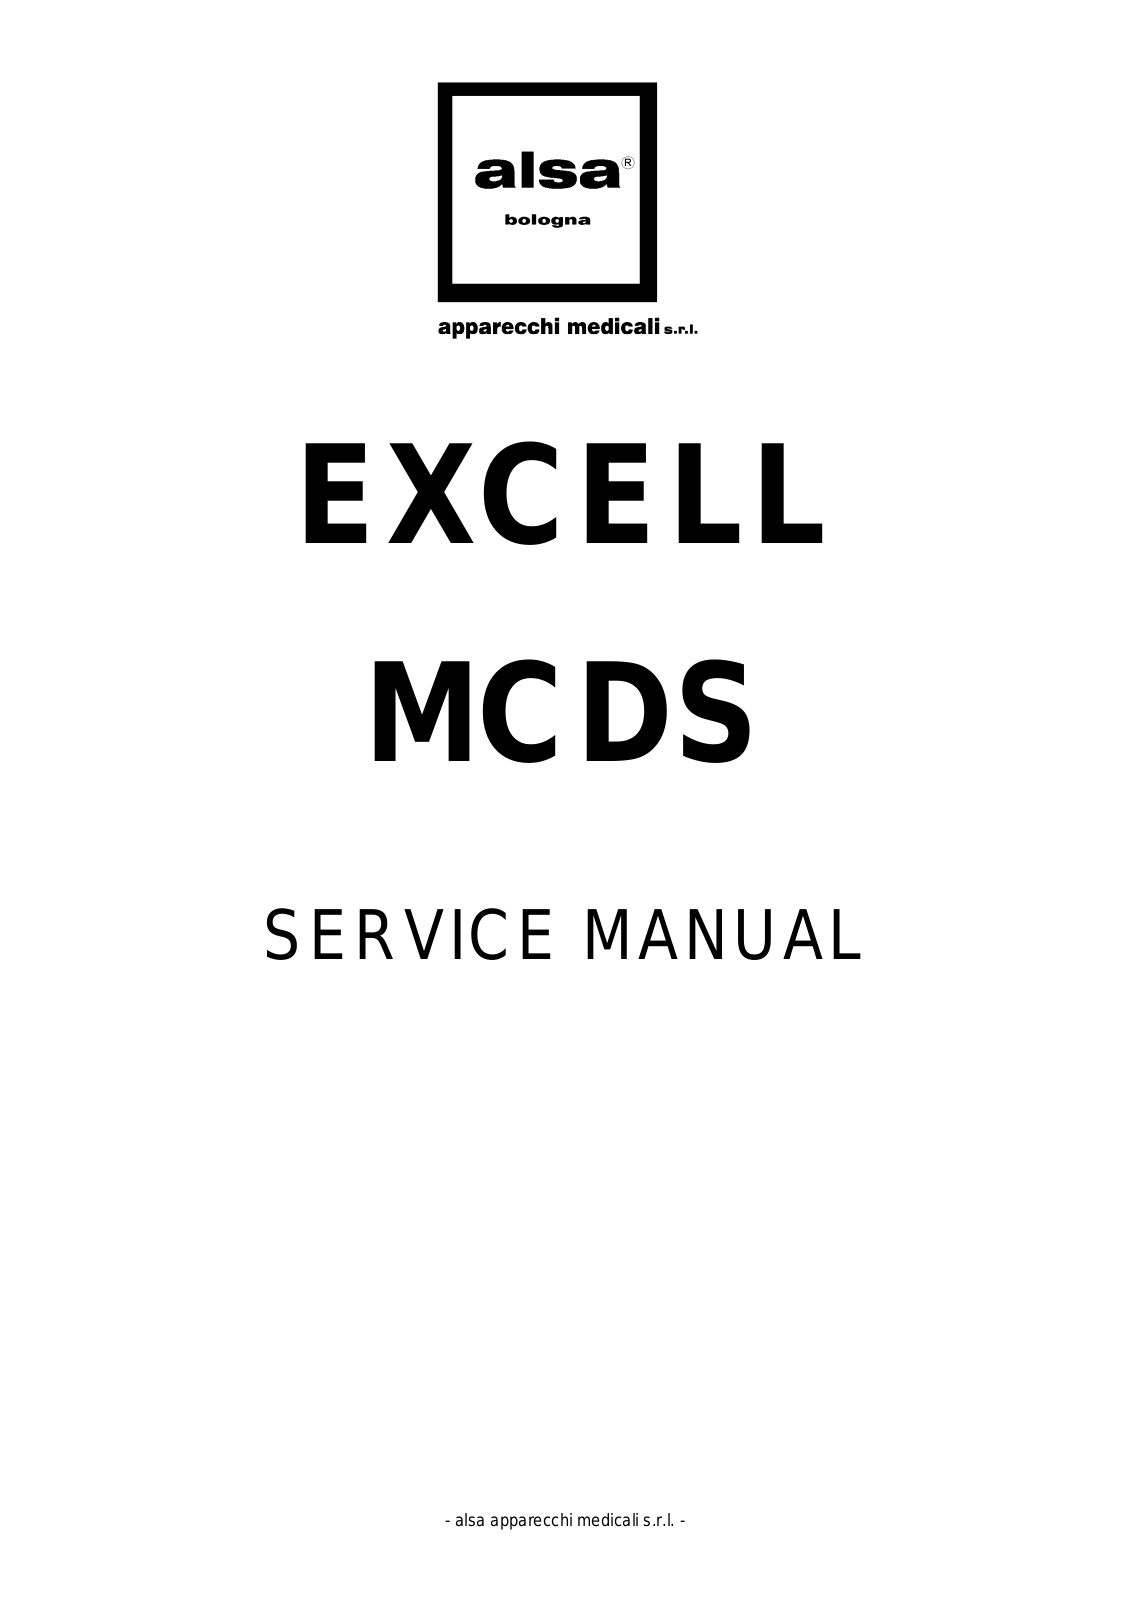 Alsa Excell MCDS User manual